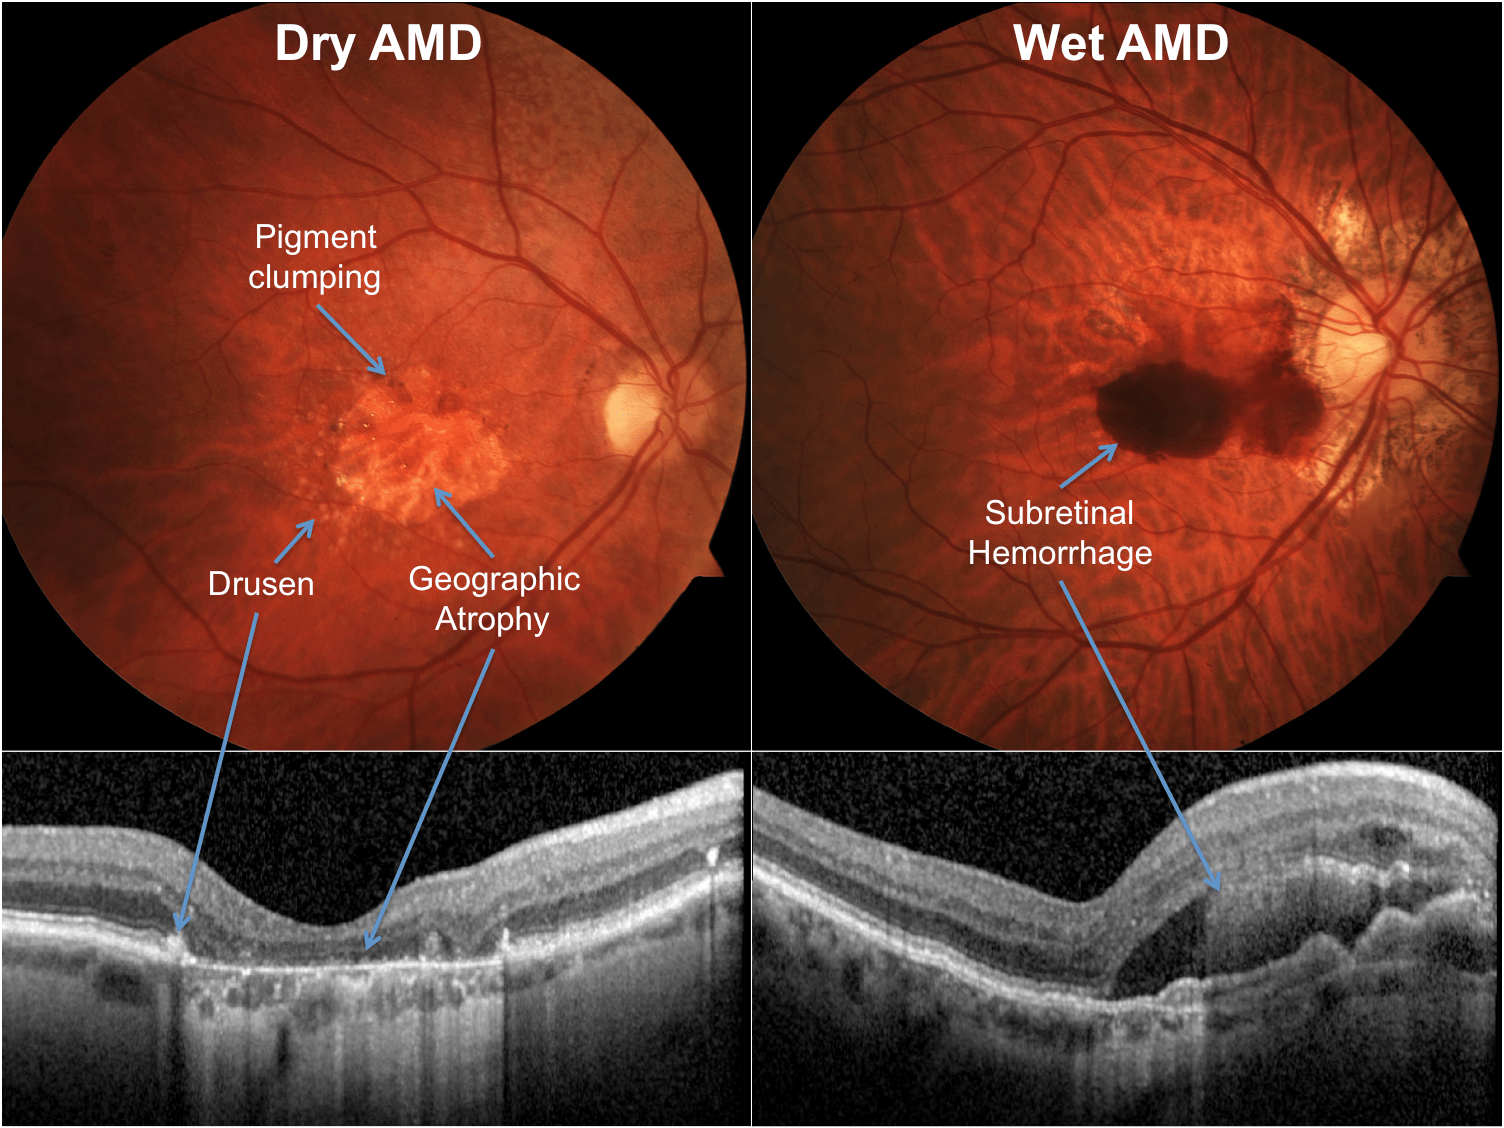 Lets talk about Macular degeneration 